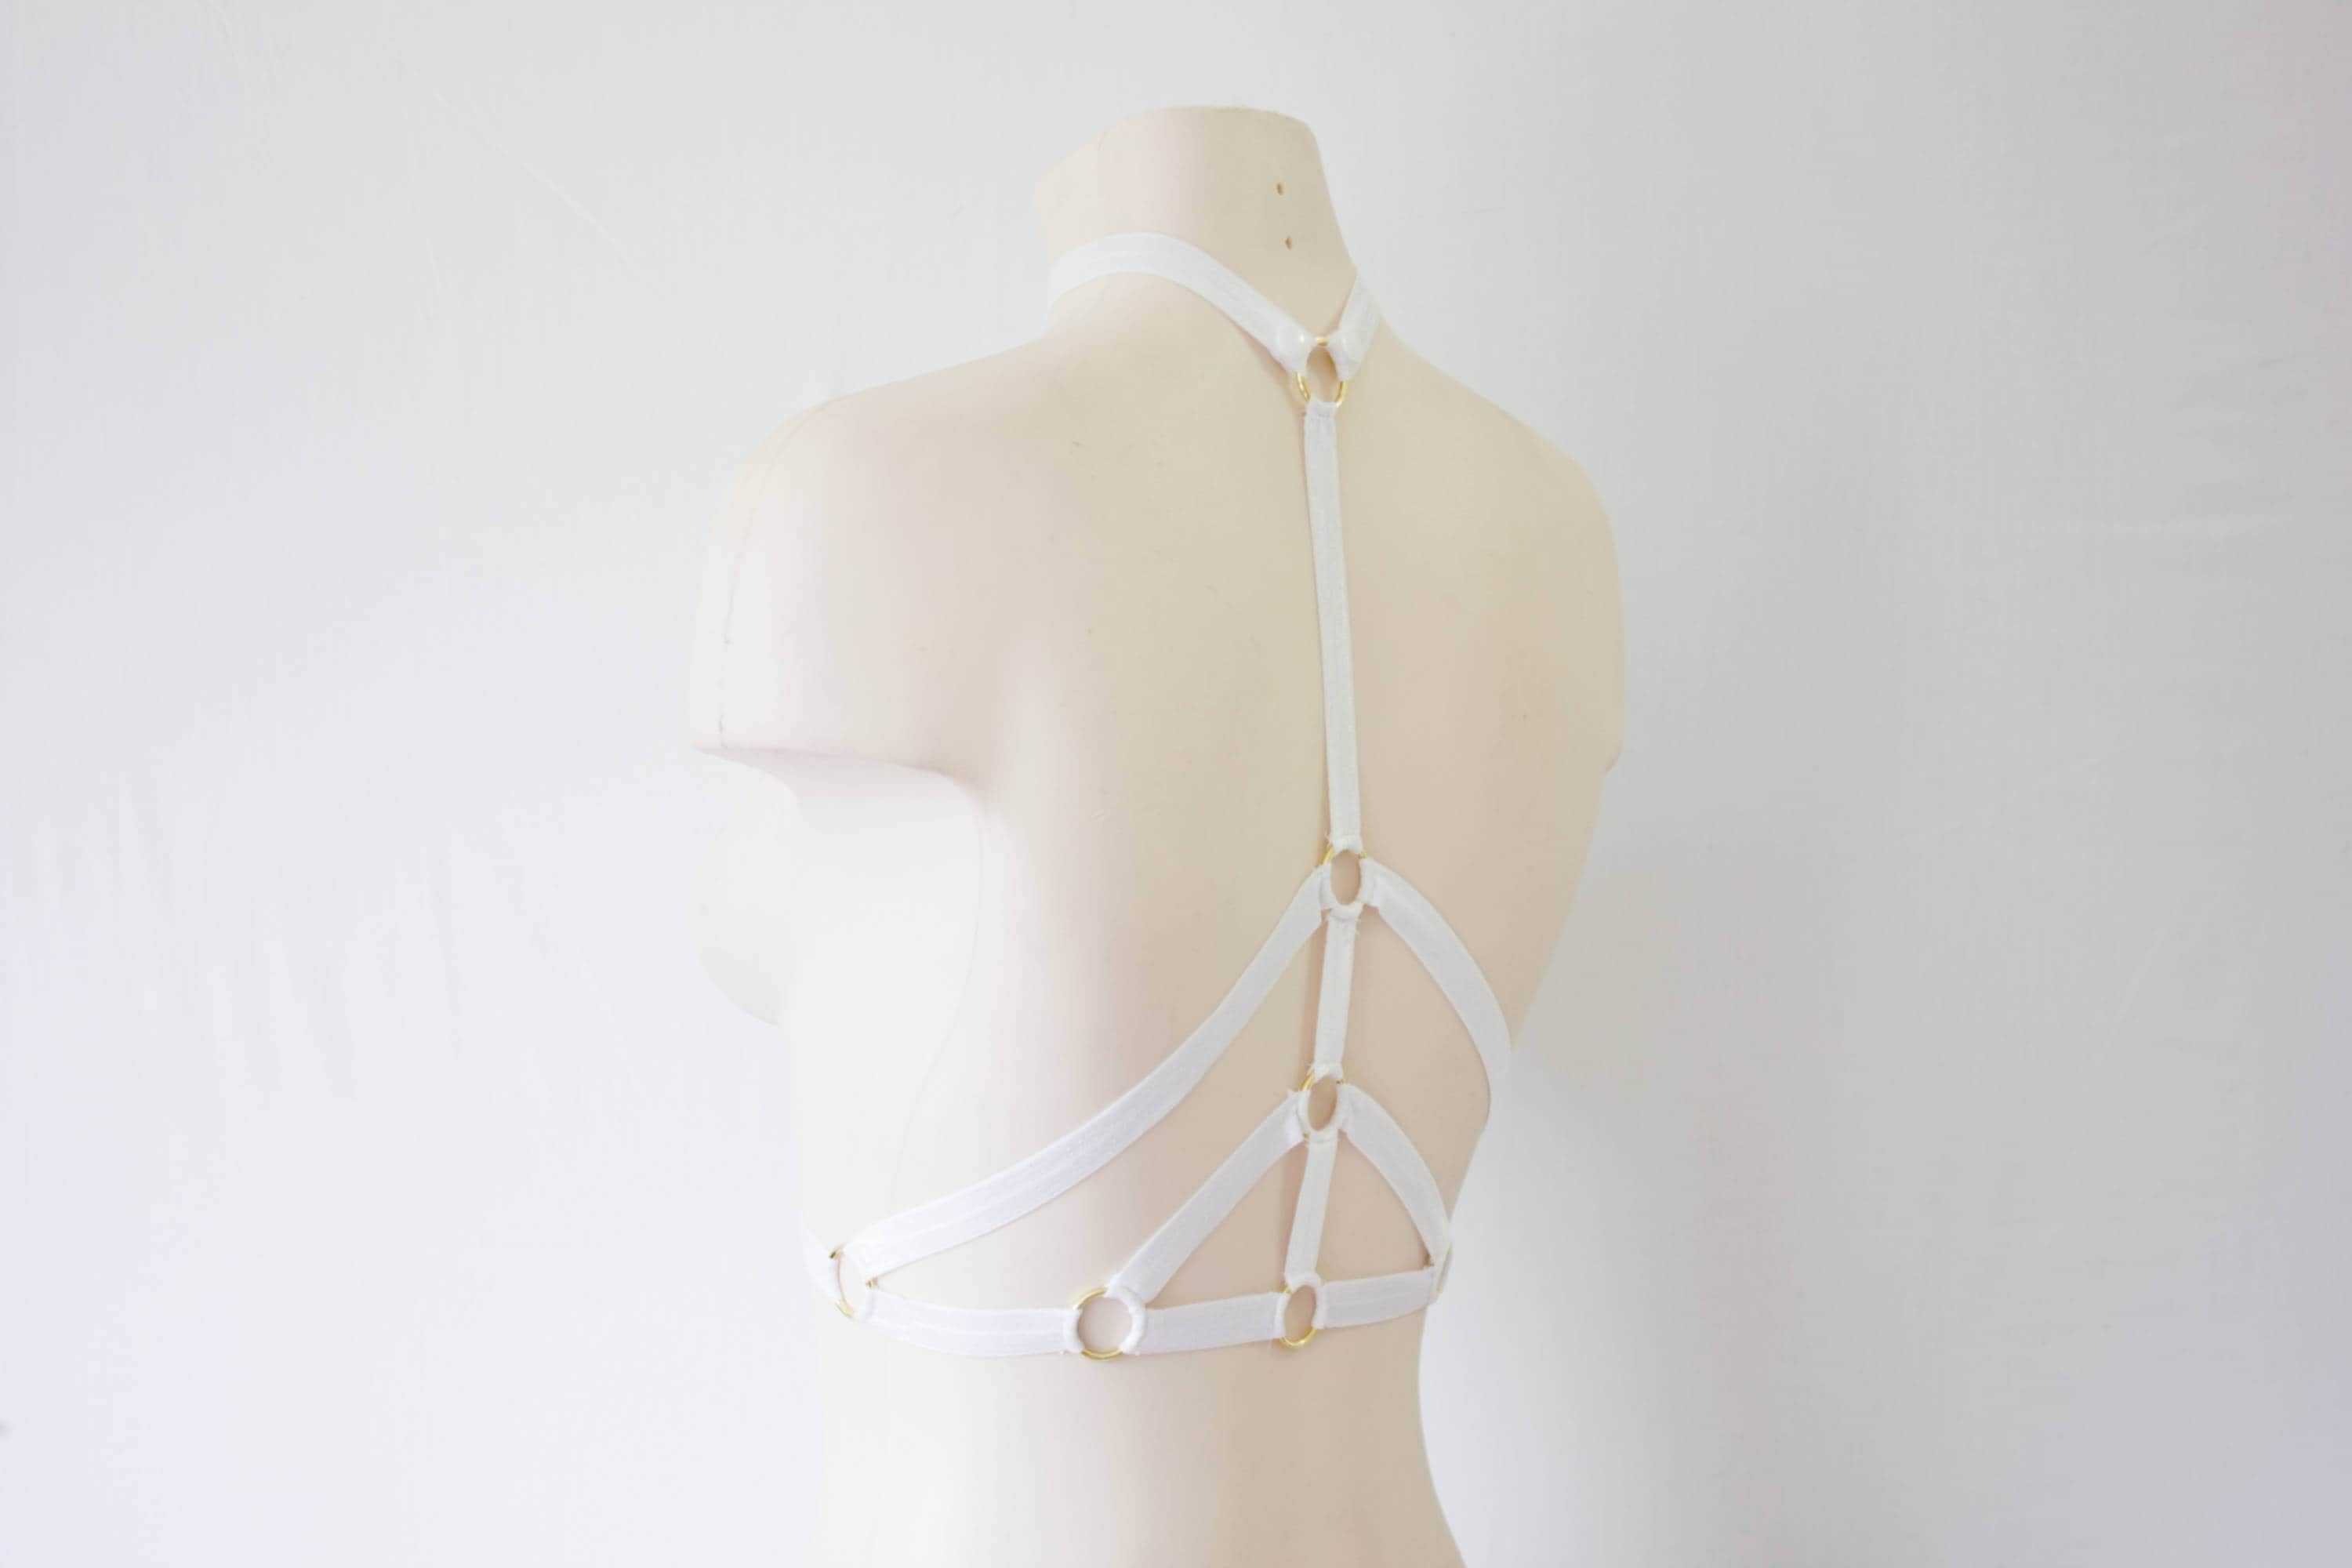 White Bralette: Wedding Lingerie, Glow Clothing, Festival Top, Rave Outfit,  Exotic Dancewear, White Lingerie, White Body Harness, Halter Top